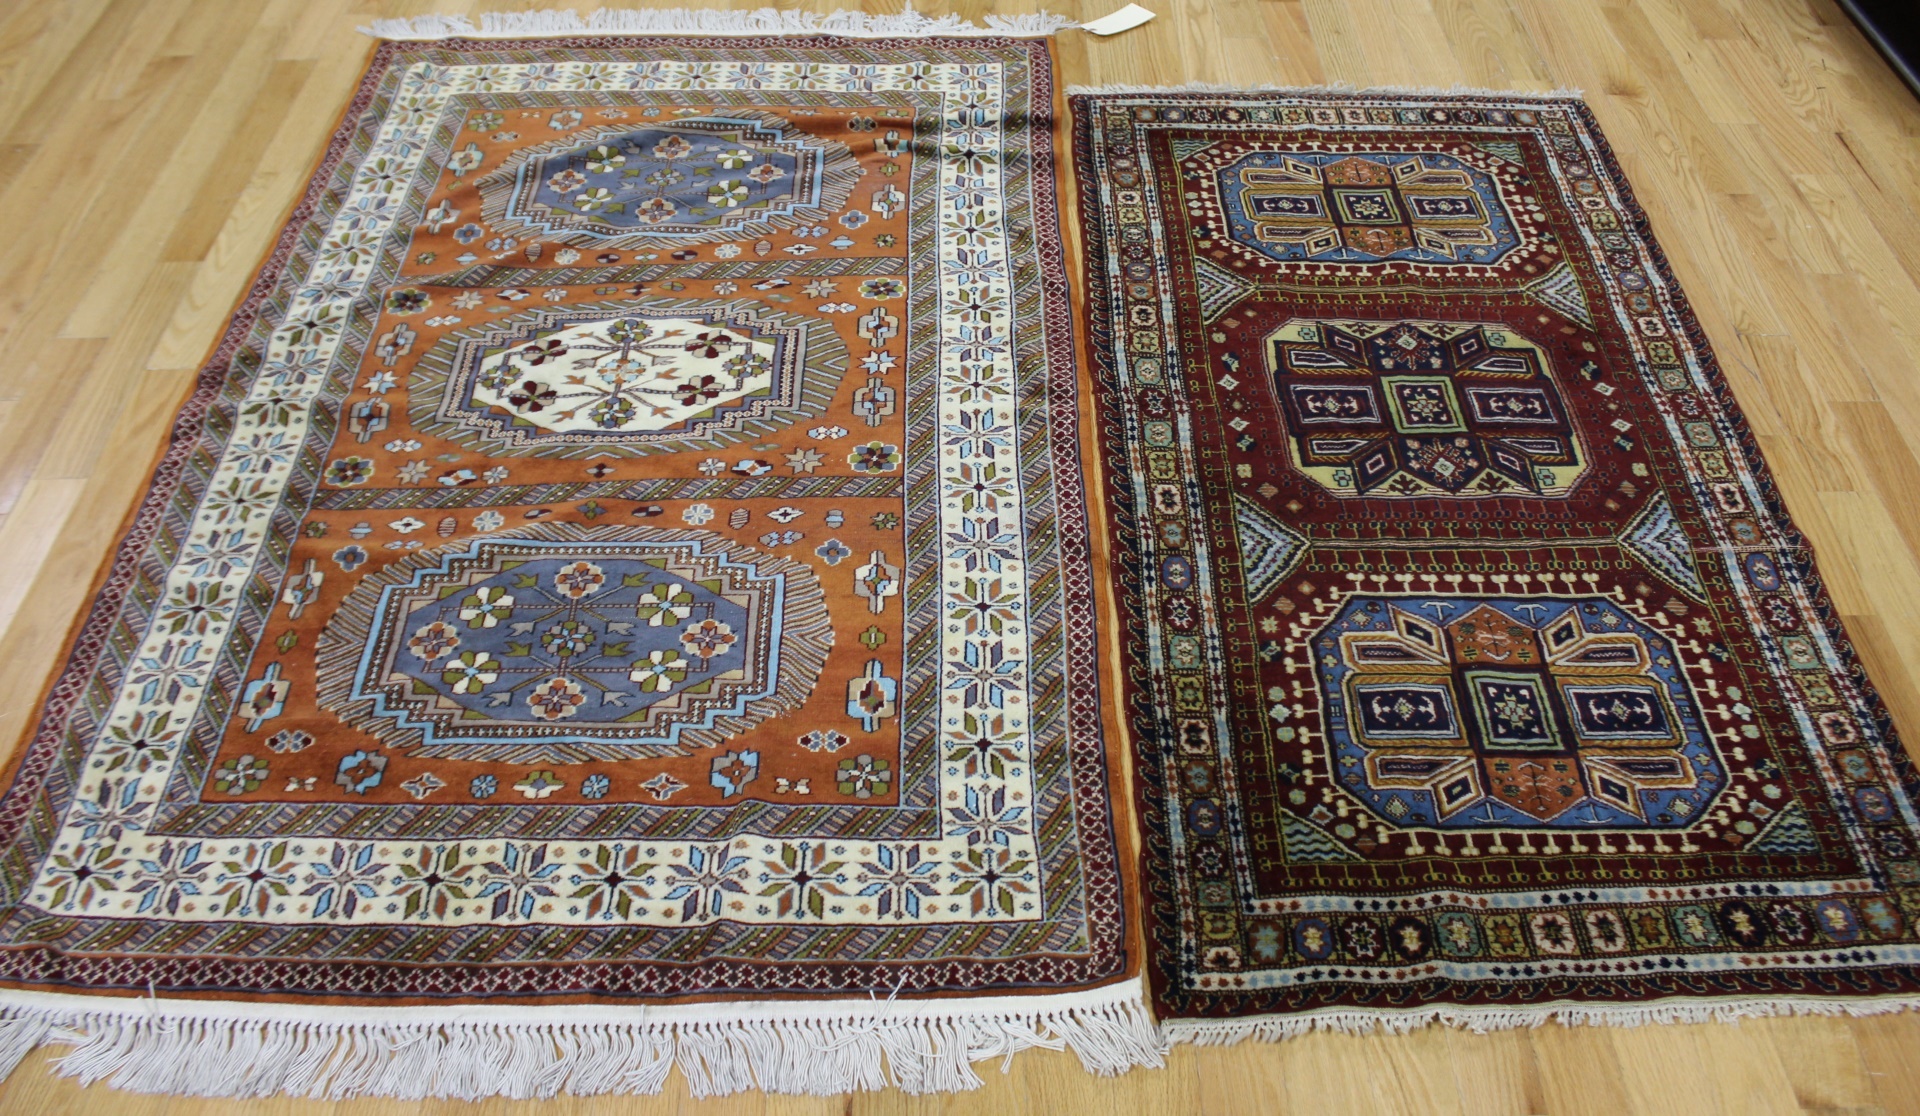 2 VINTAGE AND FINELY HAND WOVEN